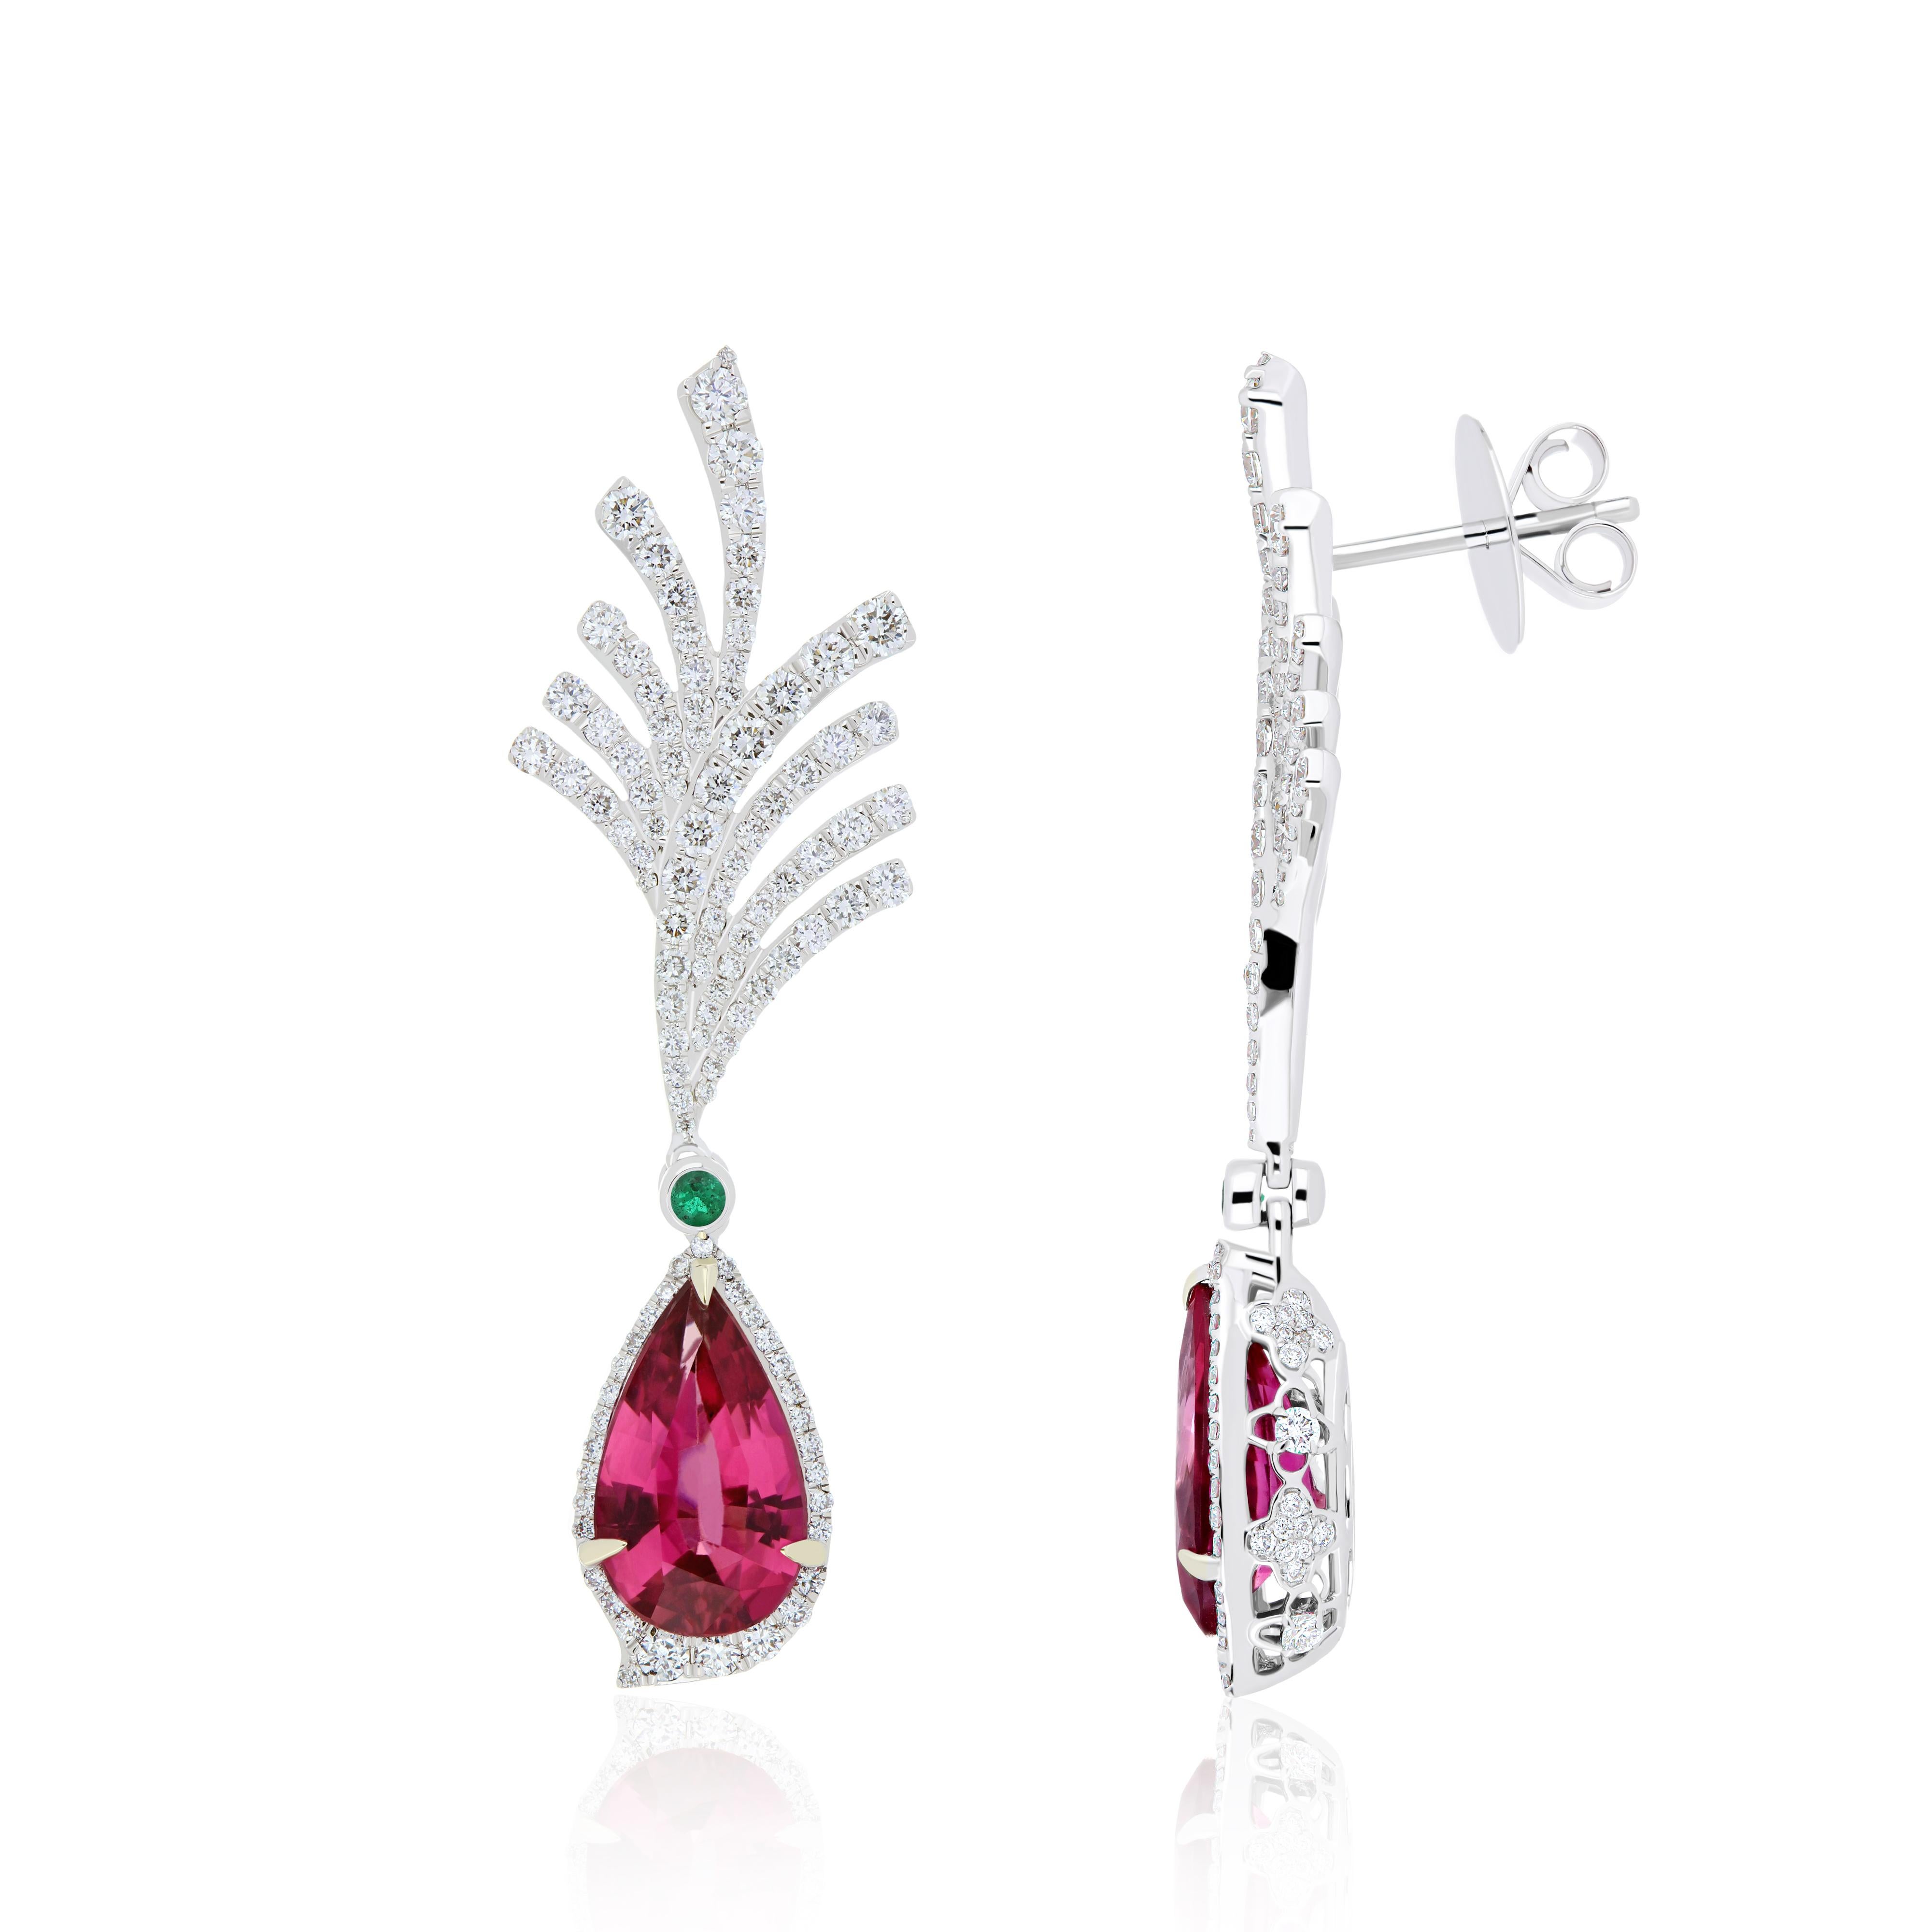 Elegant and Exquisitely detailed Gold Earring with 3.8 Cts (approx.) Pear shape Rubellite with Contrasting Vibrant Green Emeralds and accented with Micro pave set Diamonds, weighing approx.  1.8 CT's (approx.). total carat weight to further enhance